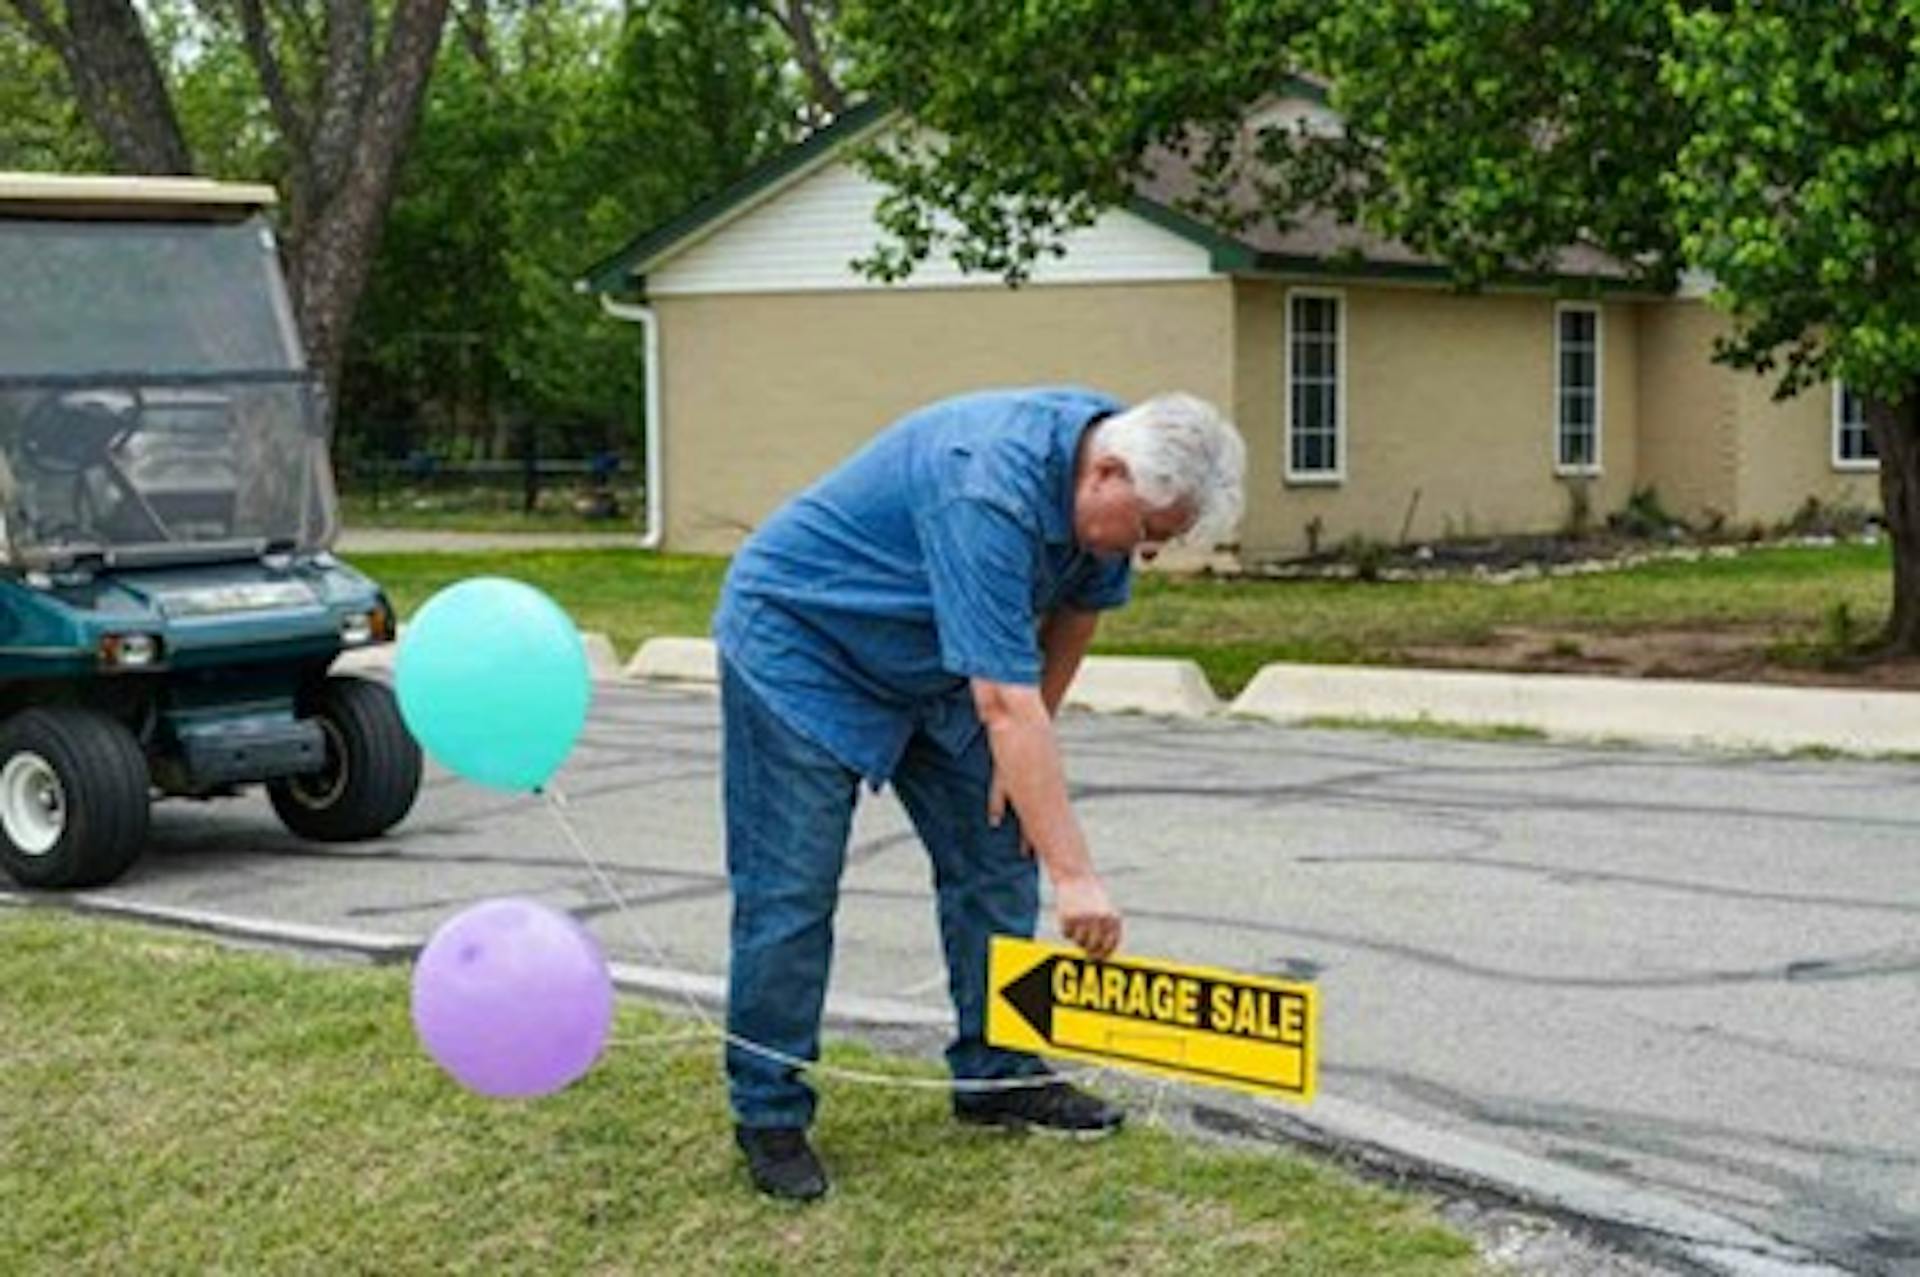 A man places a garage sale sign with balloons on a street corner